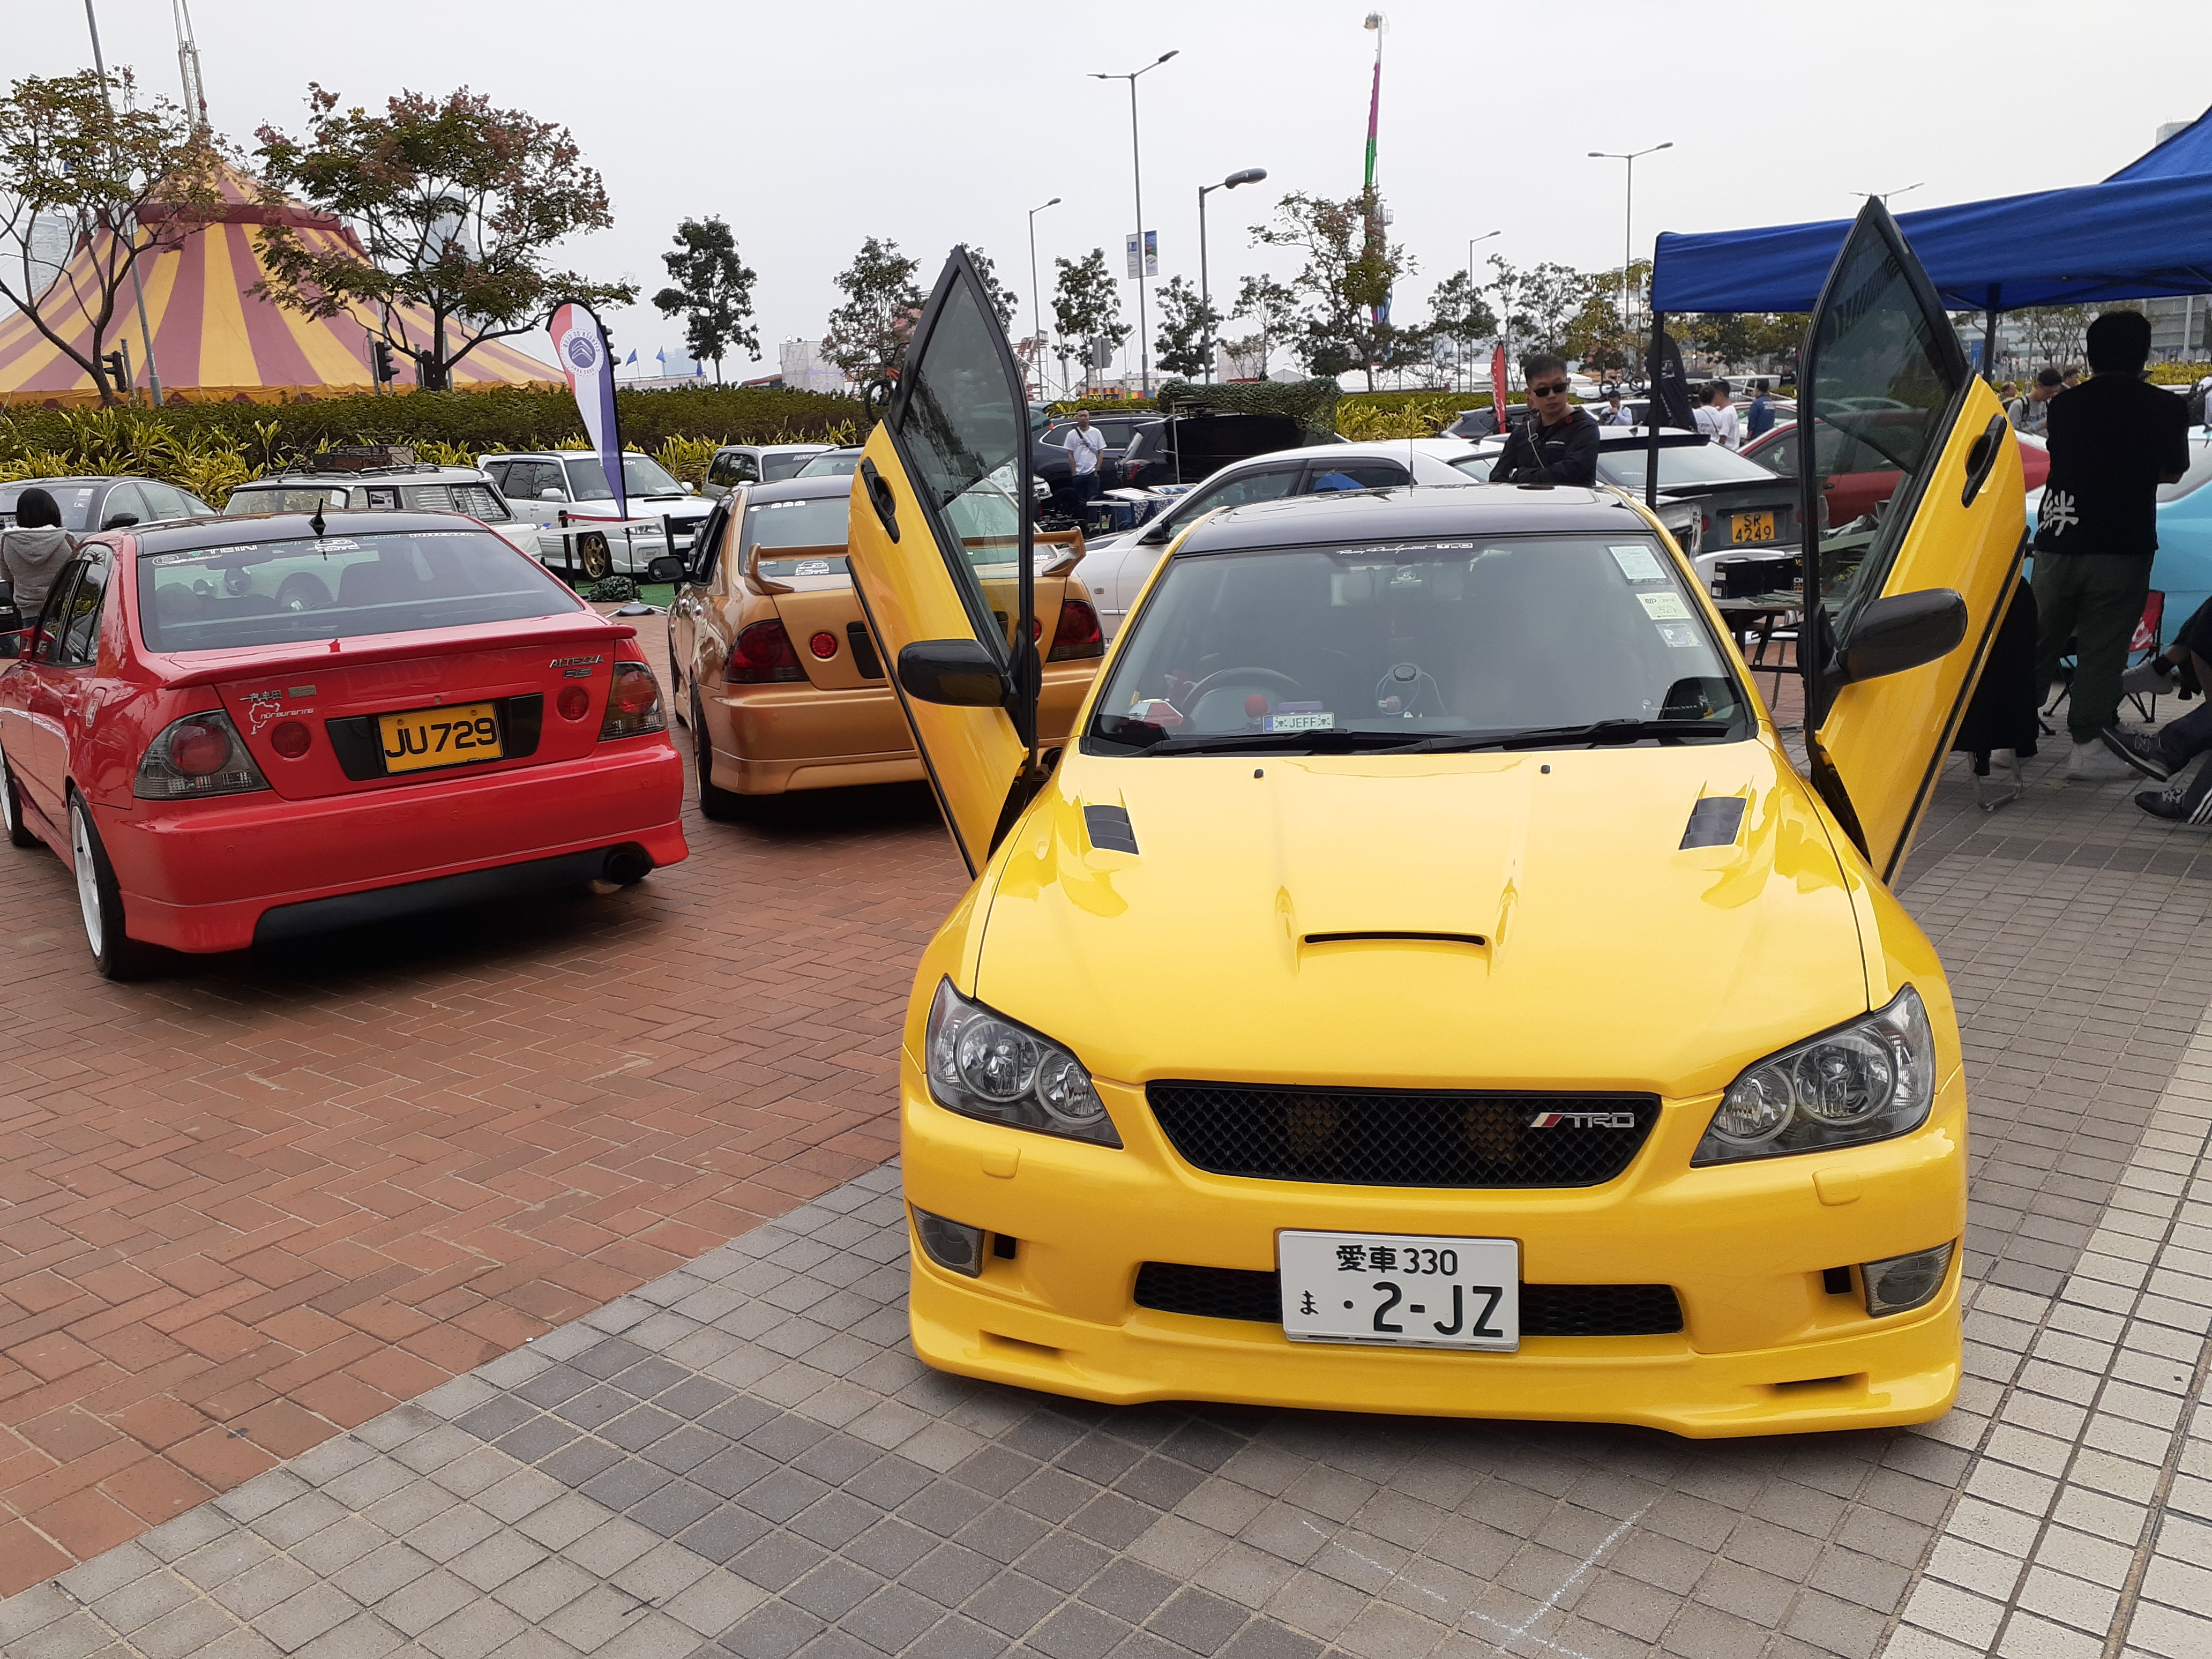 File Hk 中環 Central 愛丁堡廣場 Edinburgh Place 香港車會嘉年華 Motoring Clubs Festival Outdoor Exhibition January Ss2 Yellow Lexus 07 Jpg Wikimedia Commons